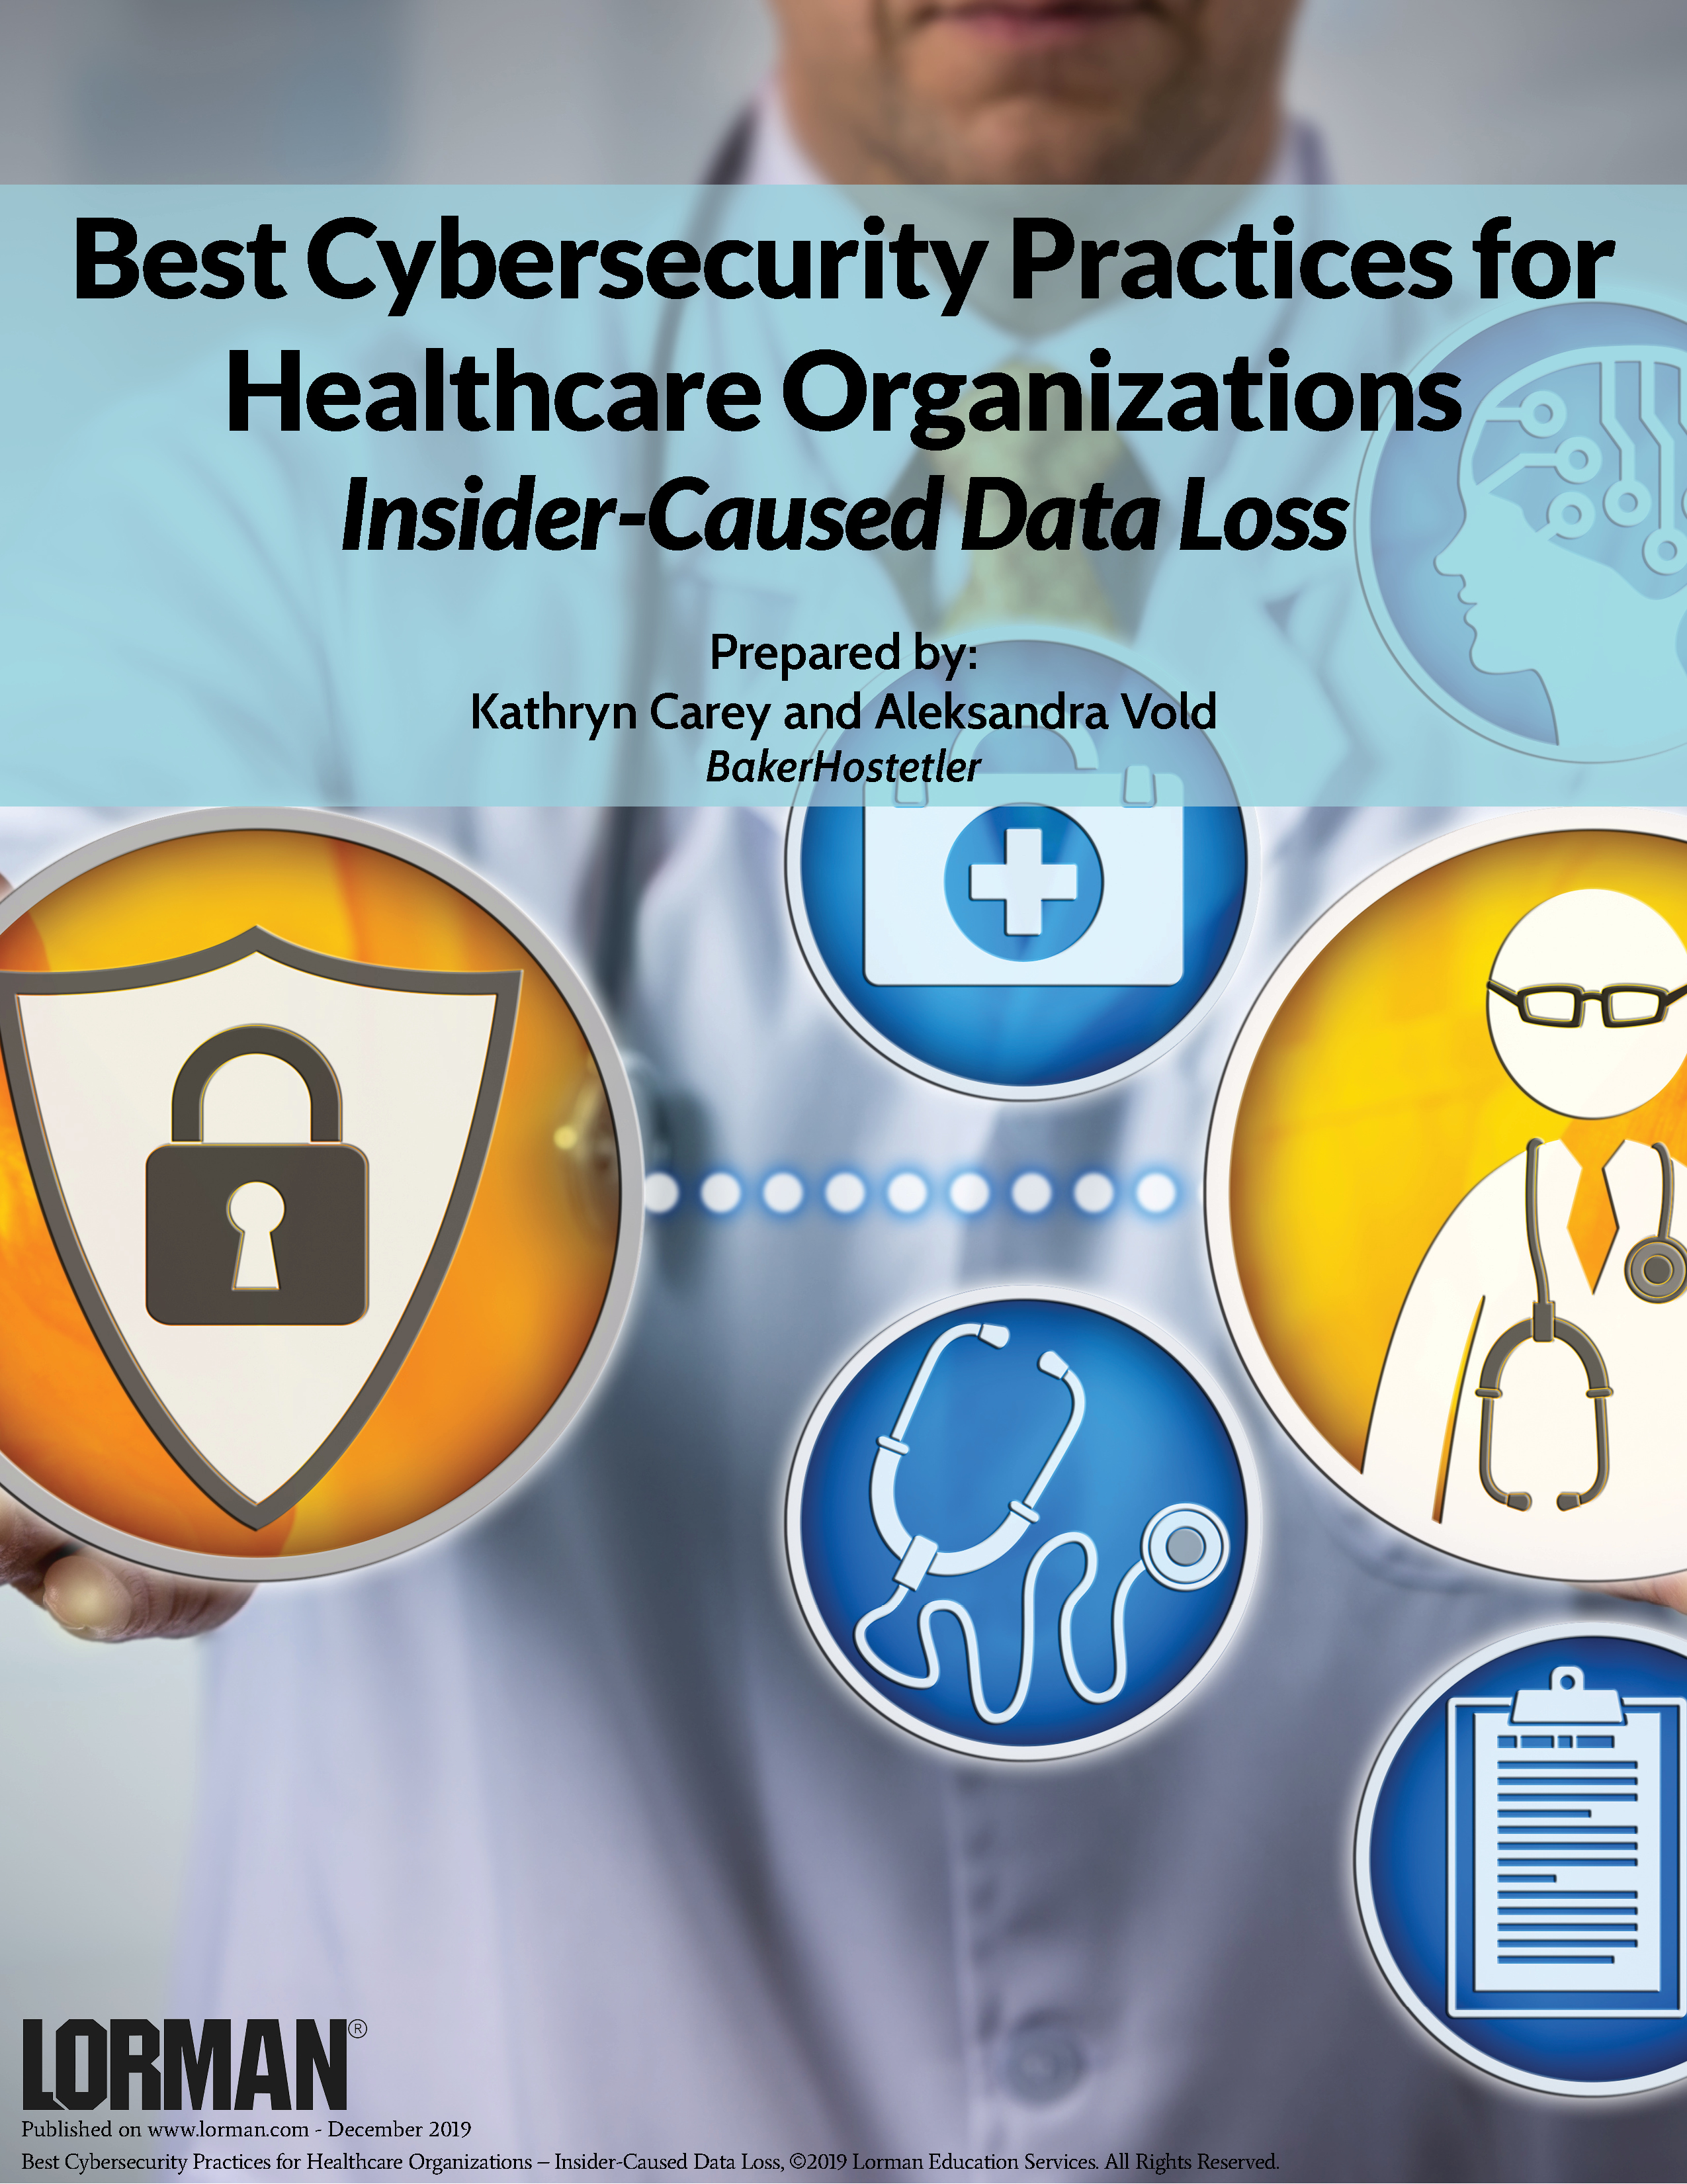 Best Cybersecurity Practices for Healthcare Organizations - Insider-Caused Data Loss